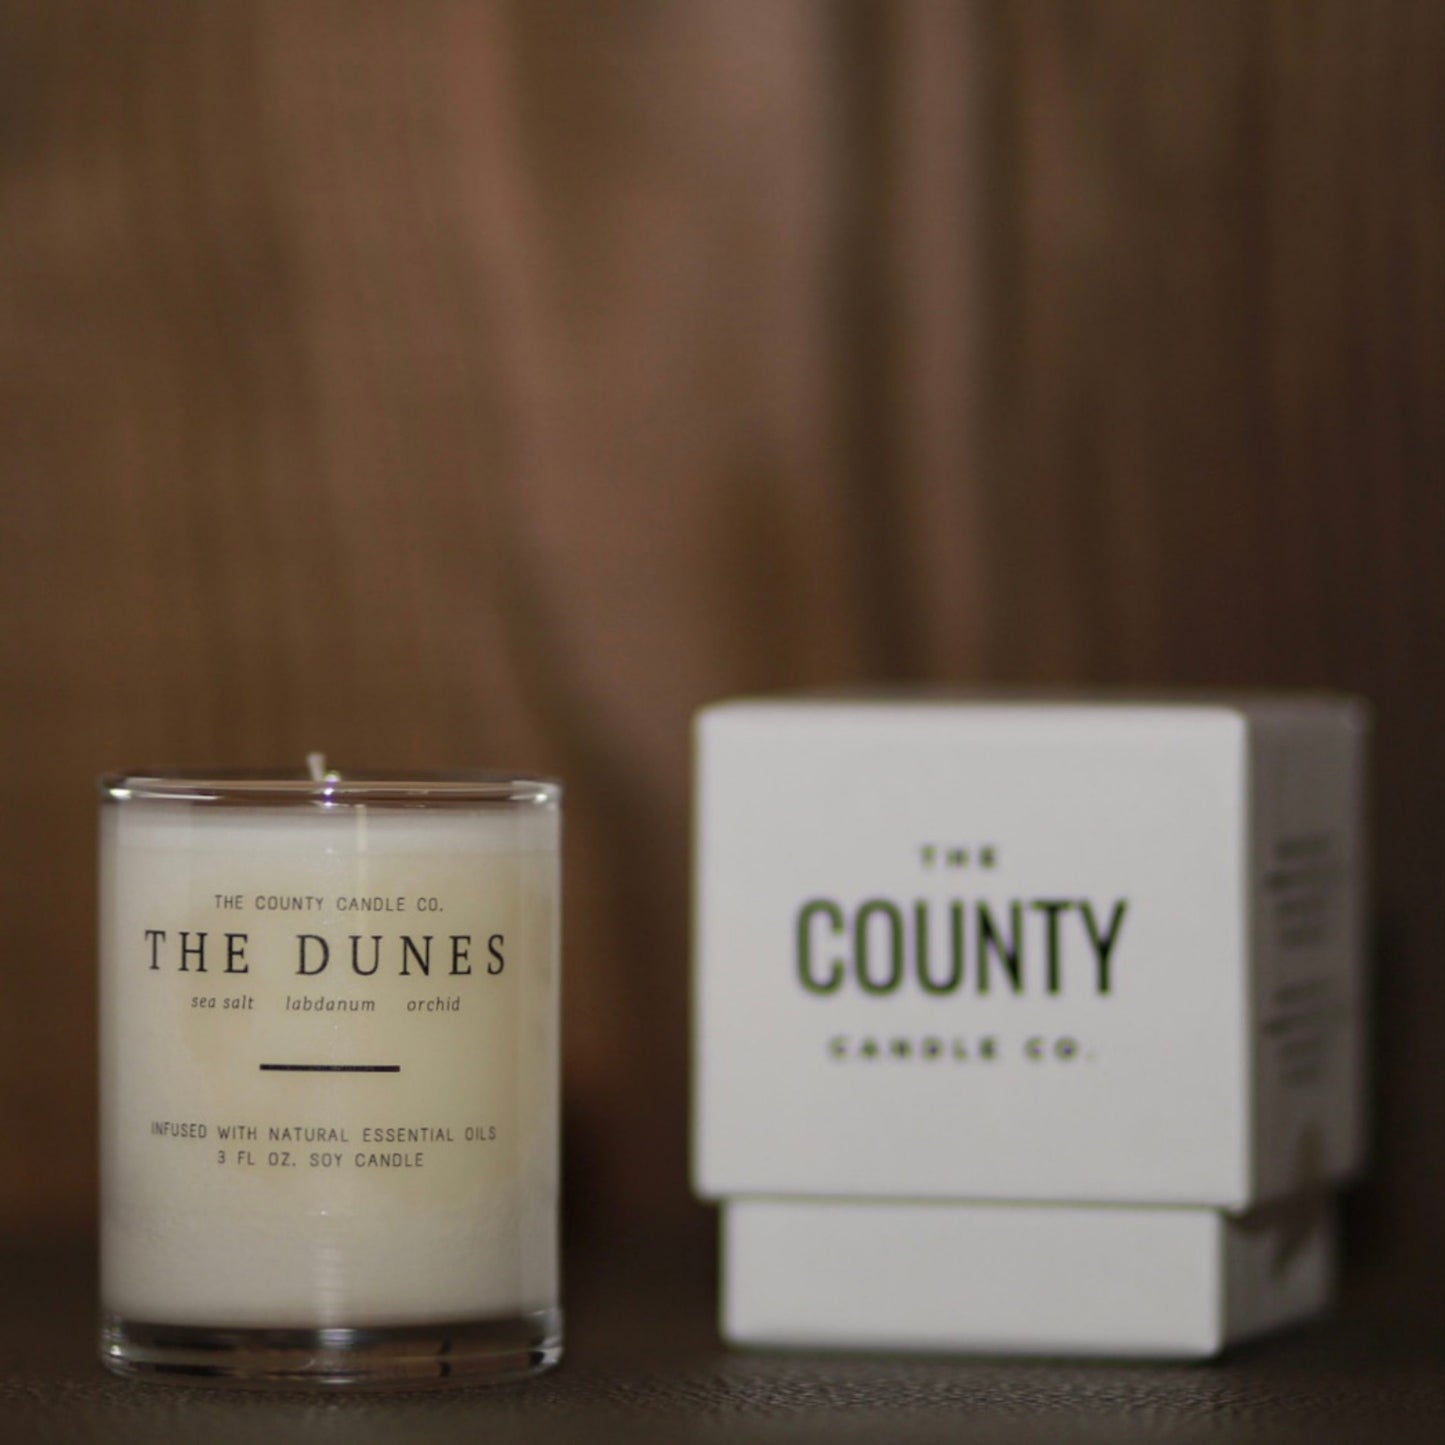 The Dunes | The County Candle Co.